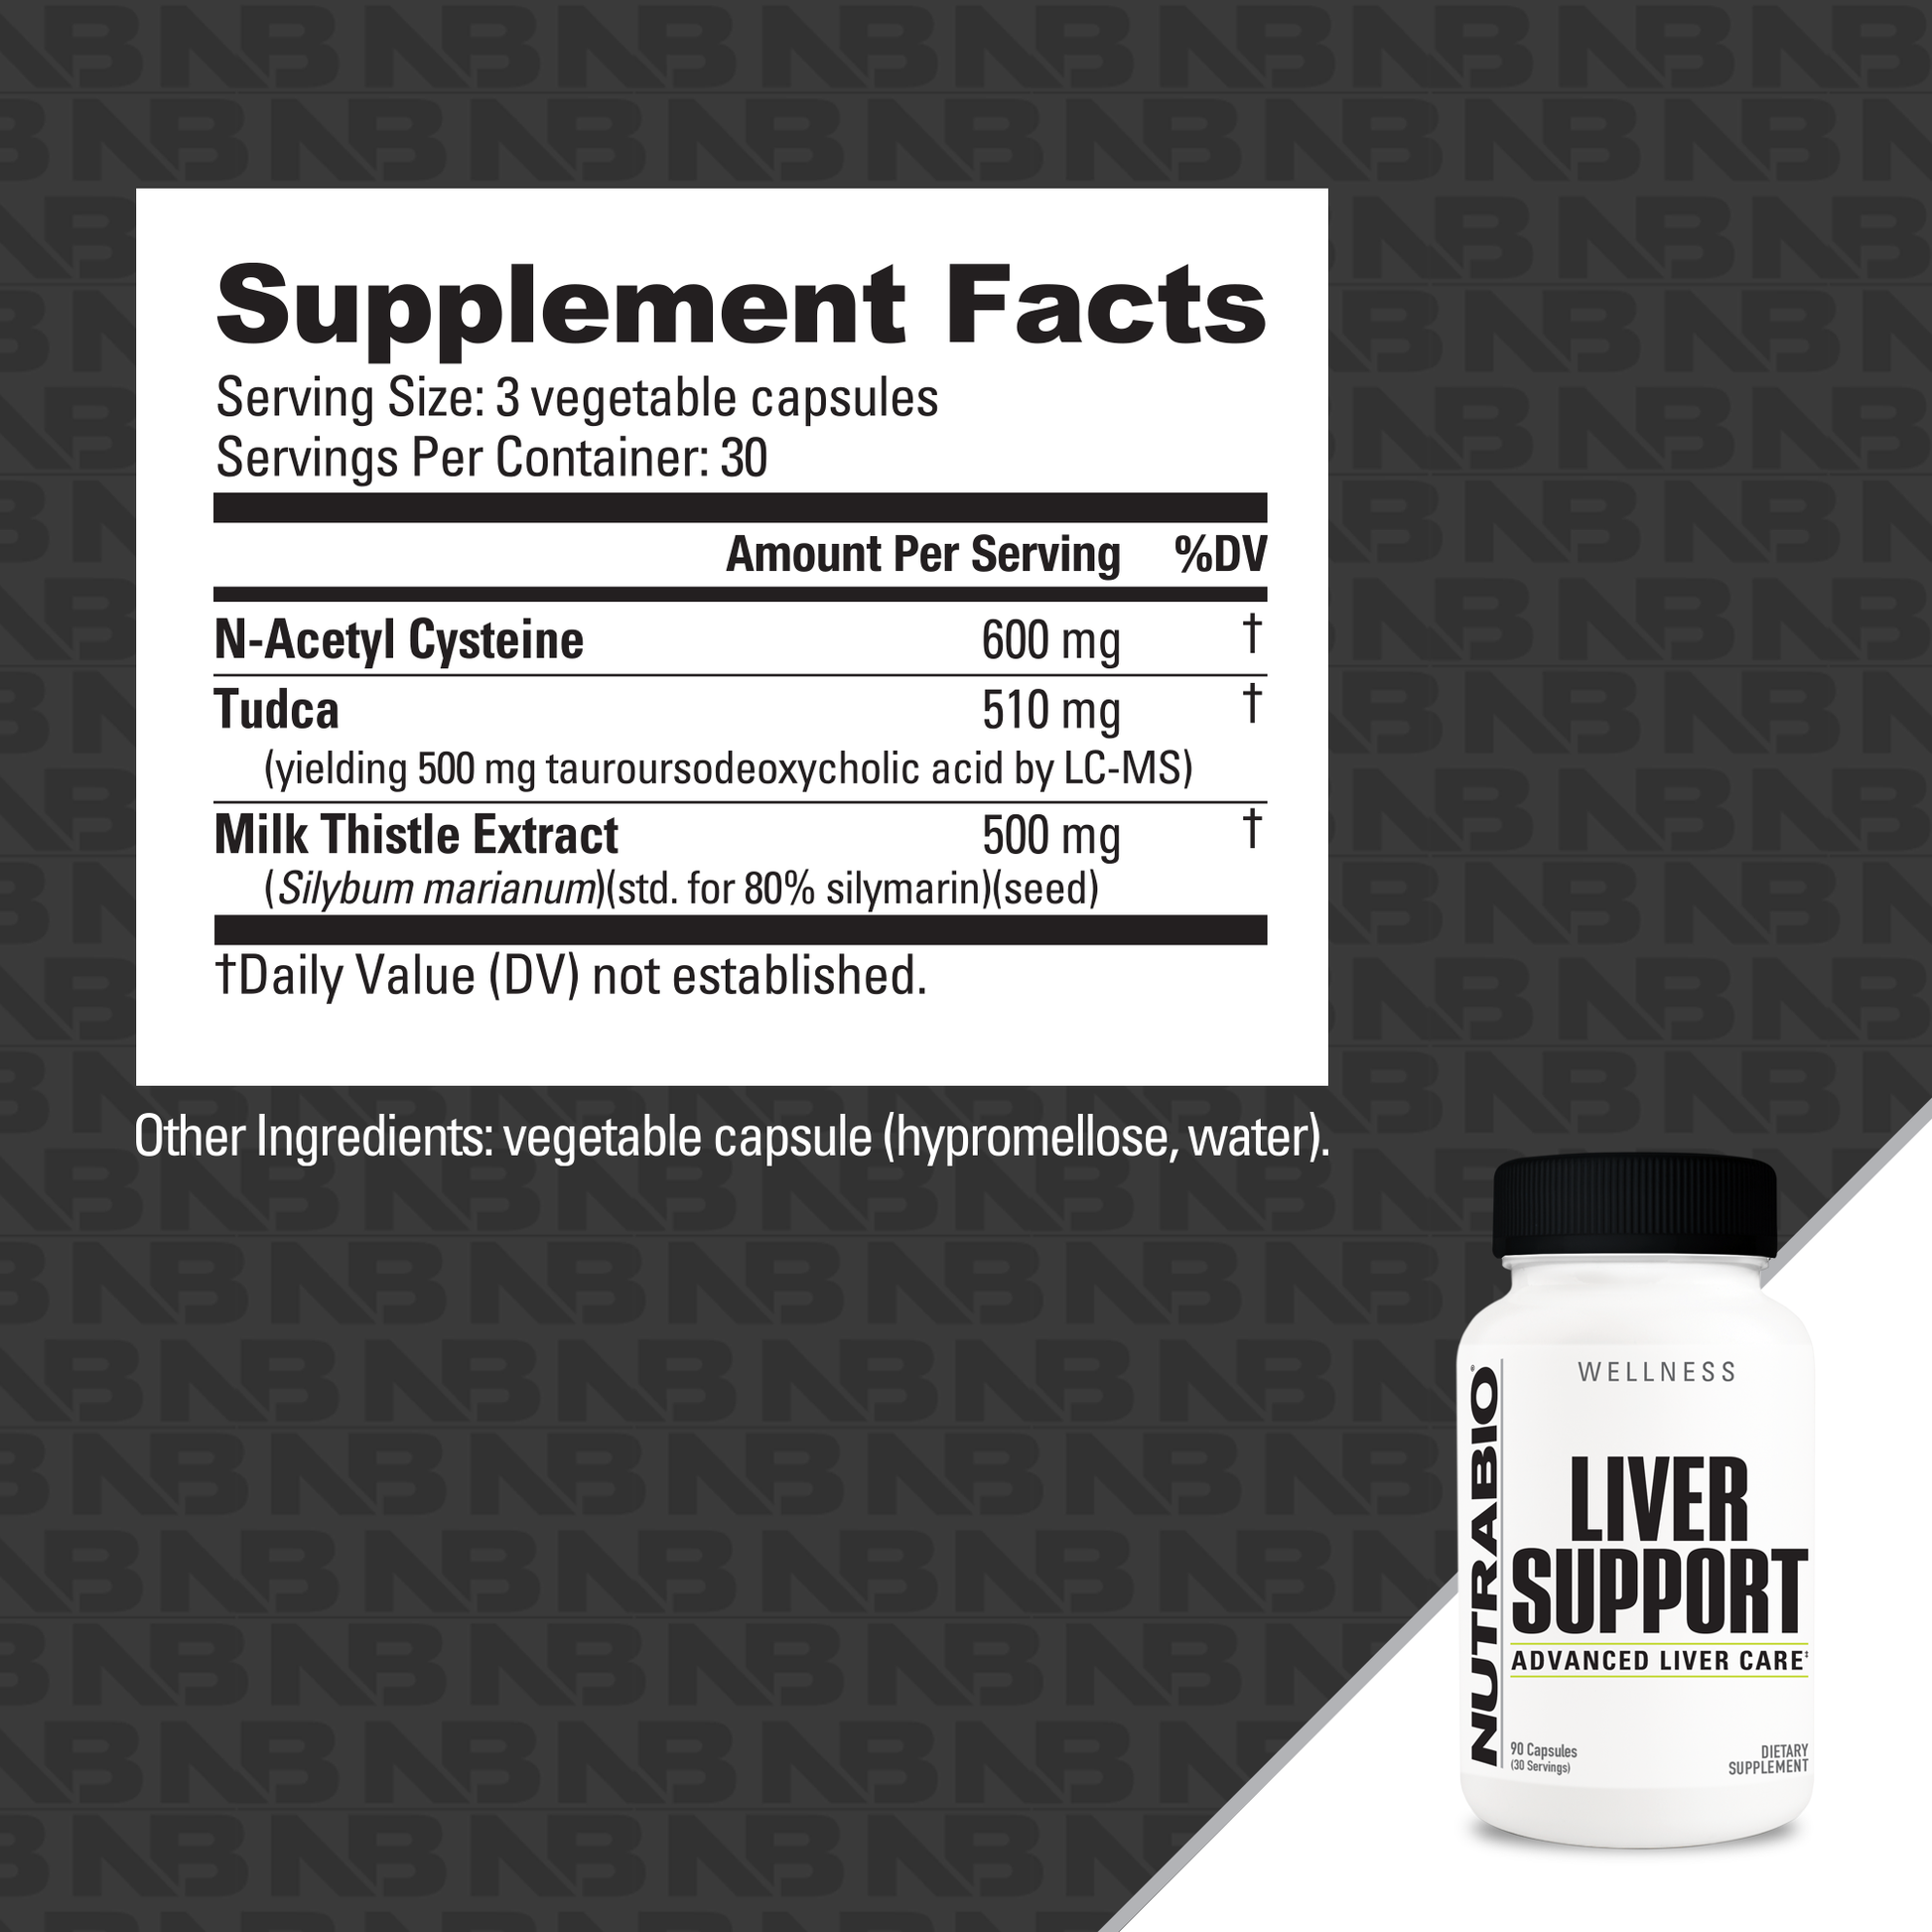 Liver Supplement Facts Panel